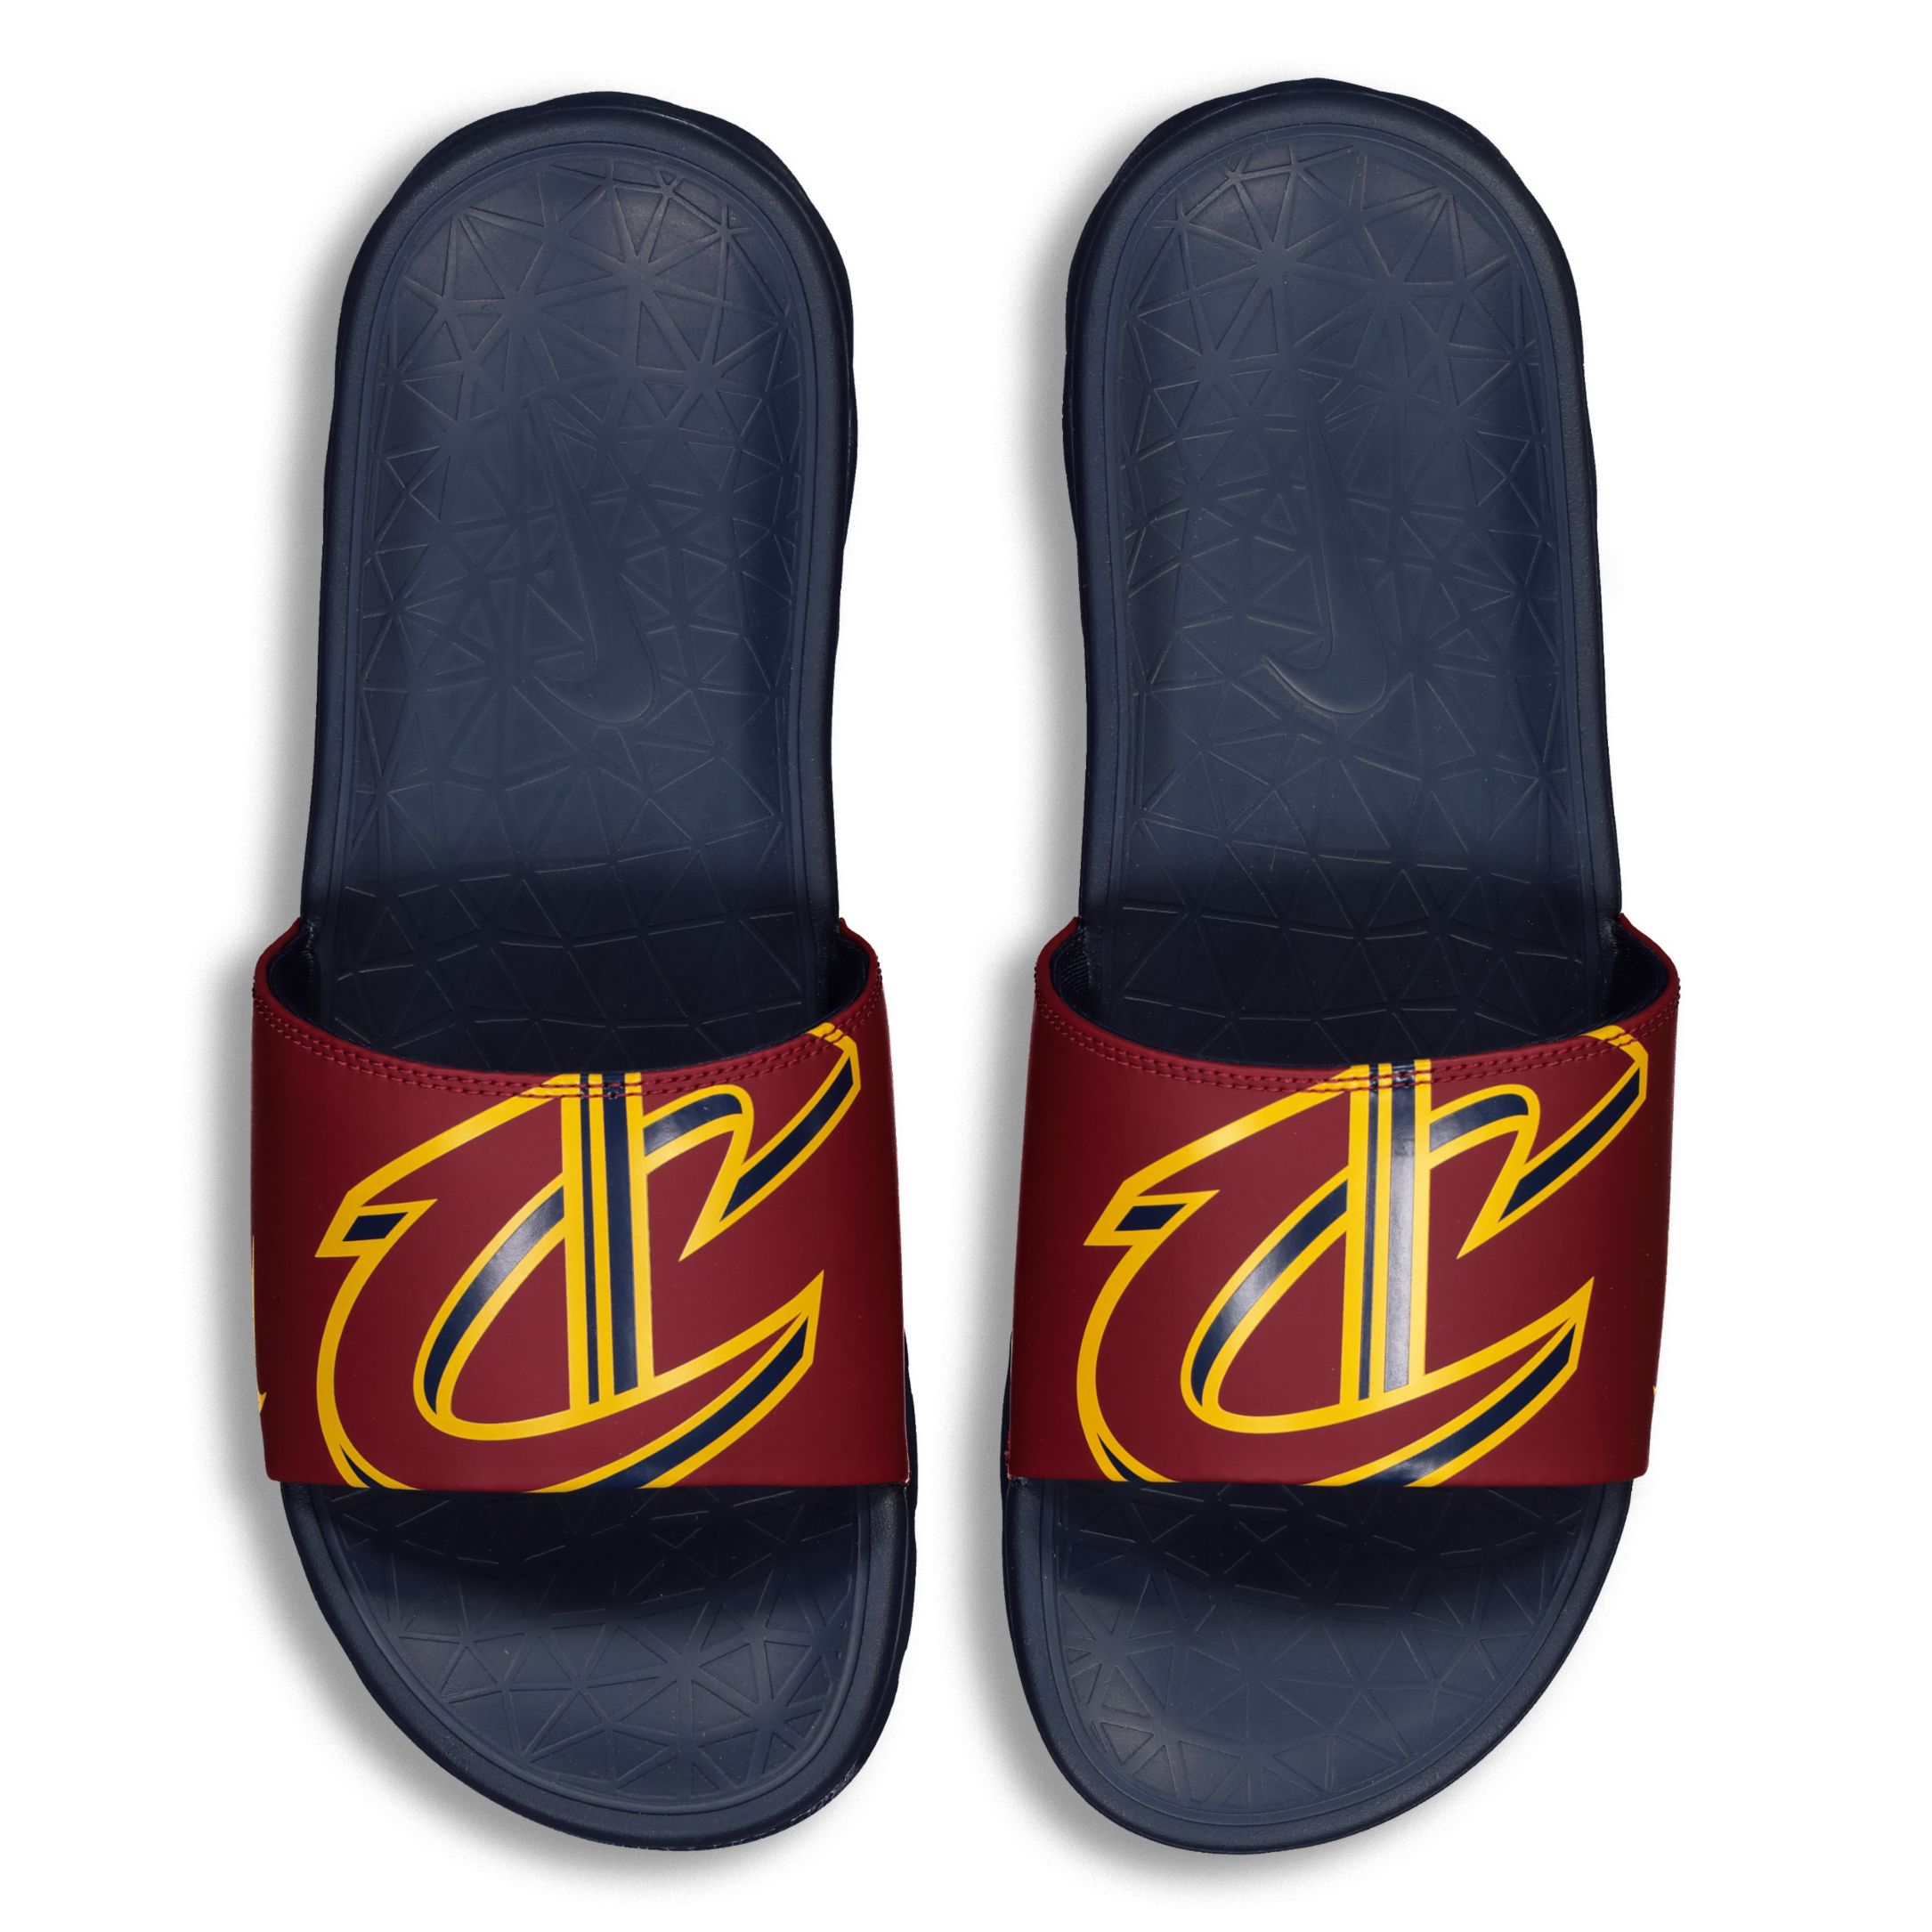 maroon nike slides with gold swoosh